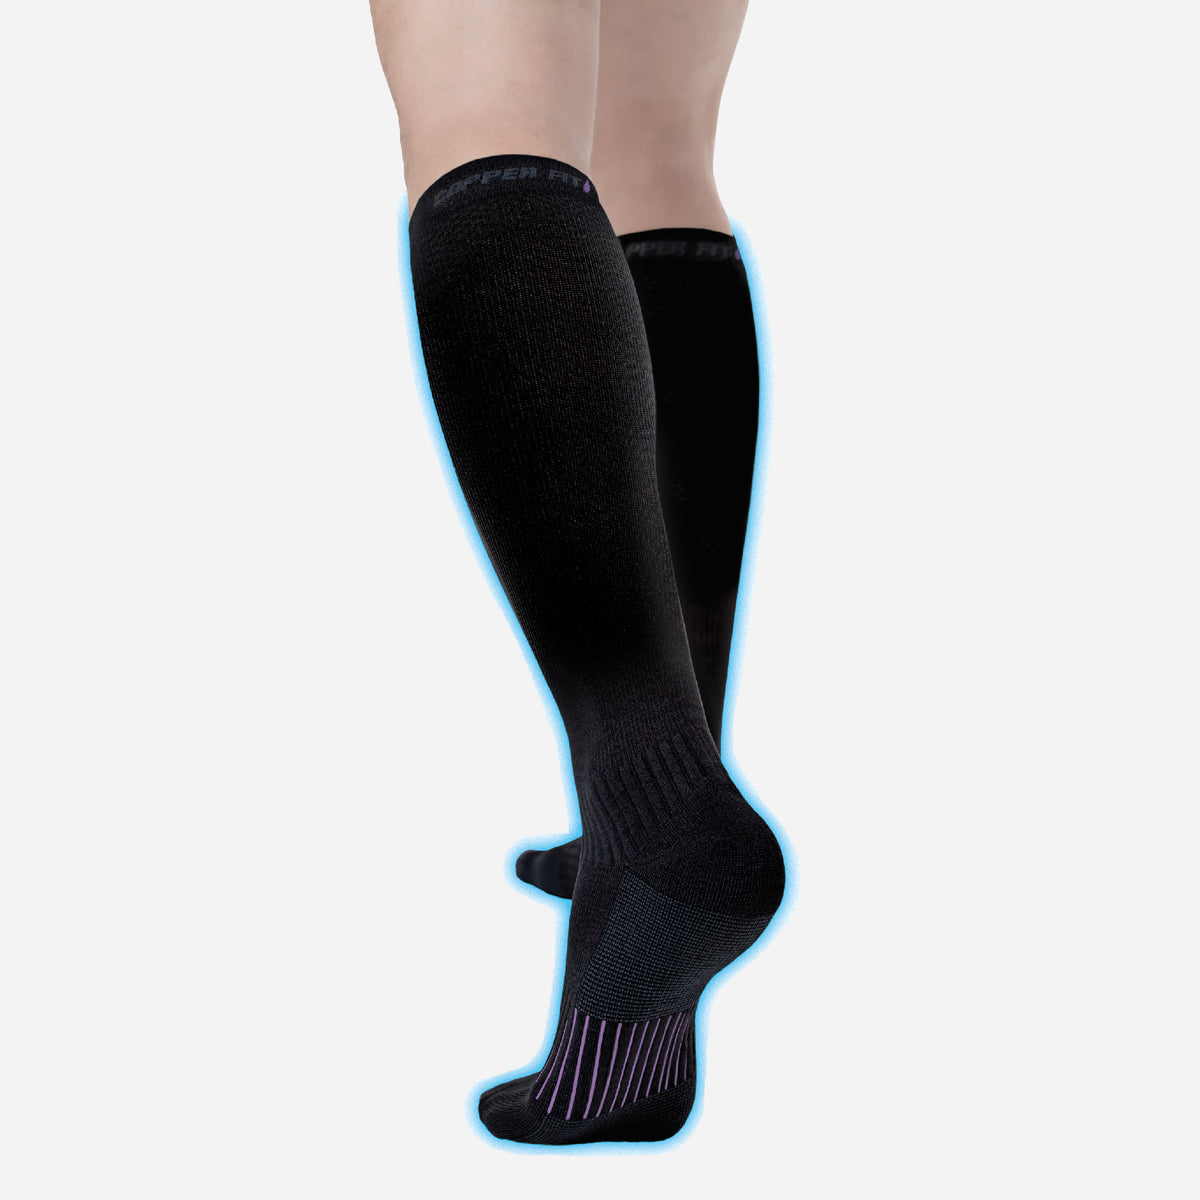 Copper Fit Energy Compression Socks - 2 Pair